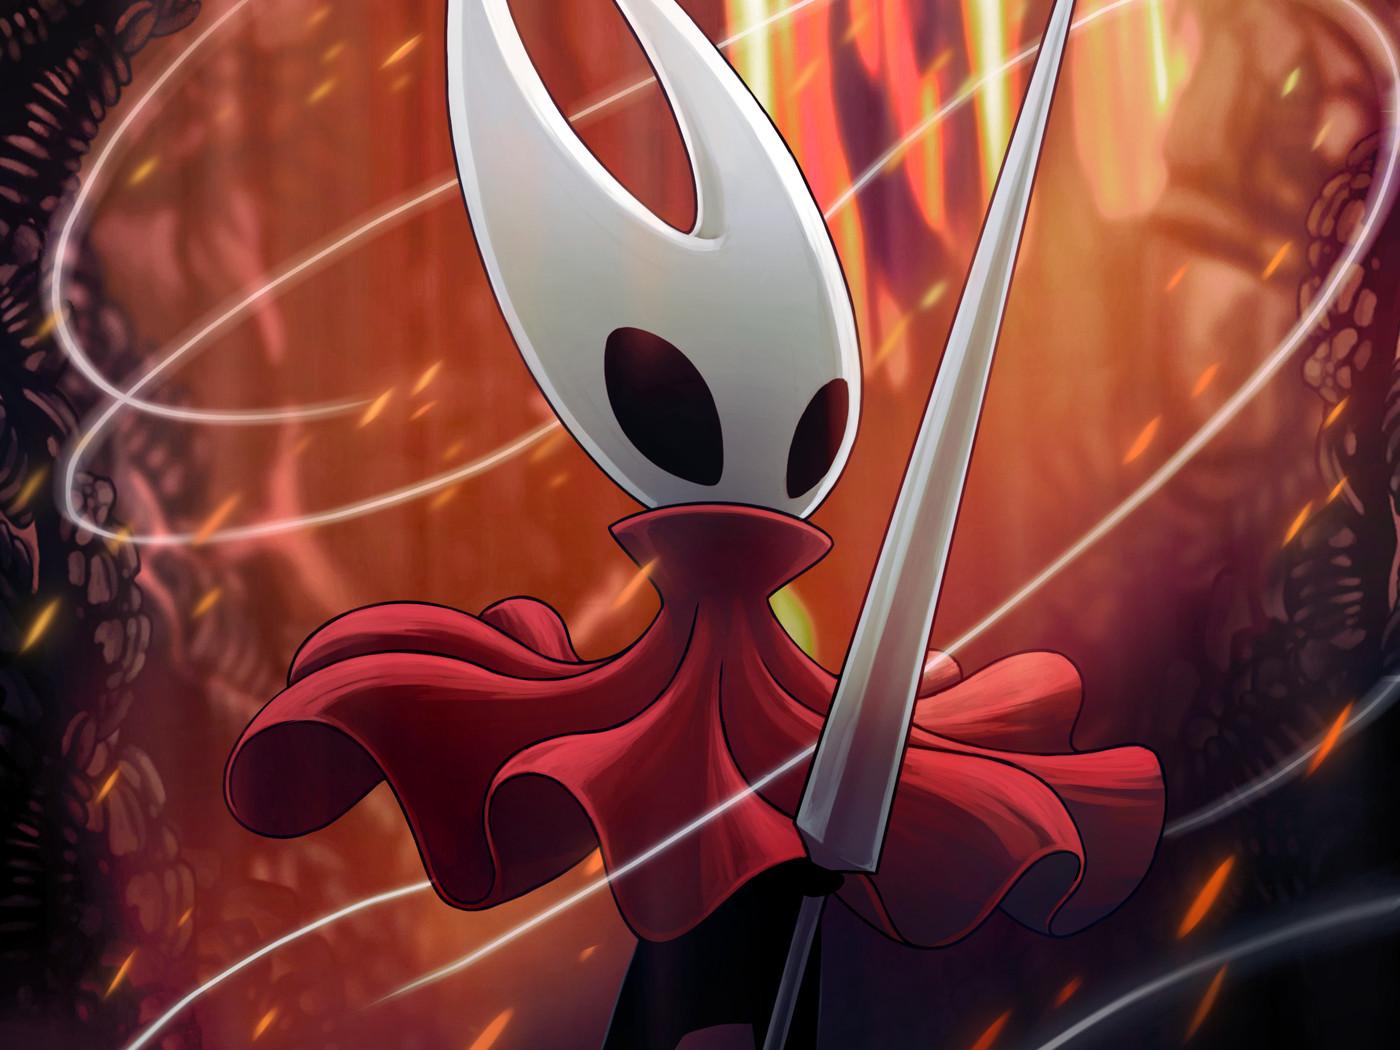 Hollow Knight: Silksong announced for Nintendo Switch and PC